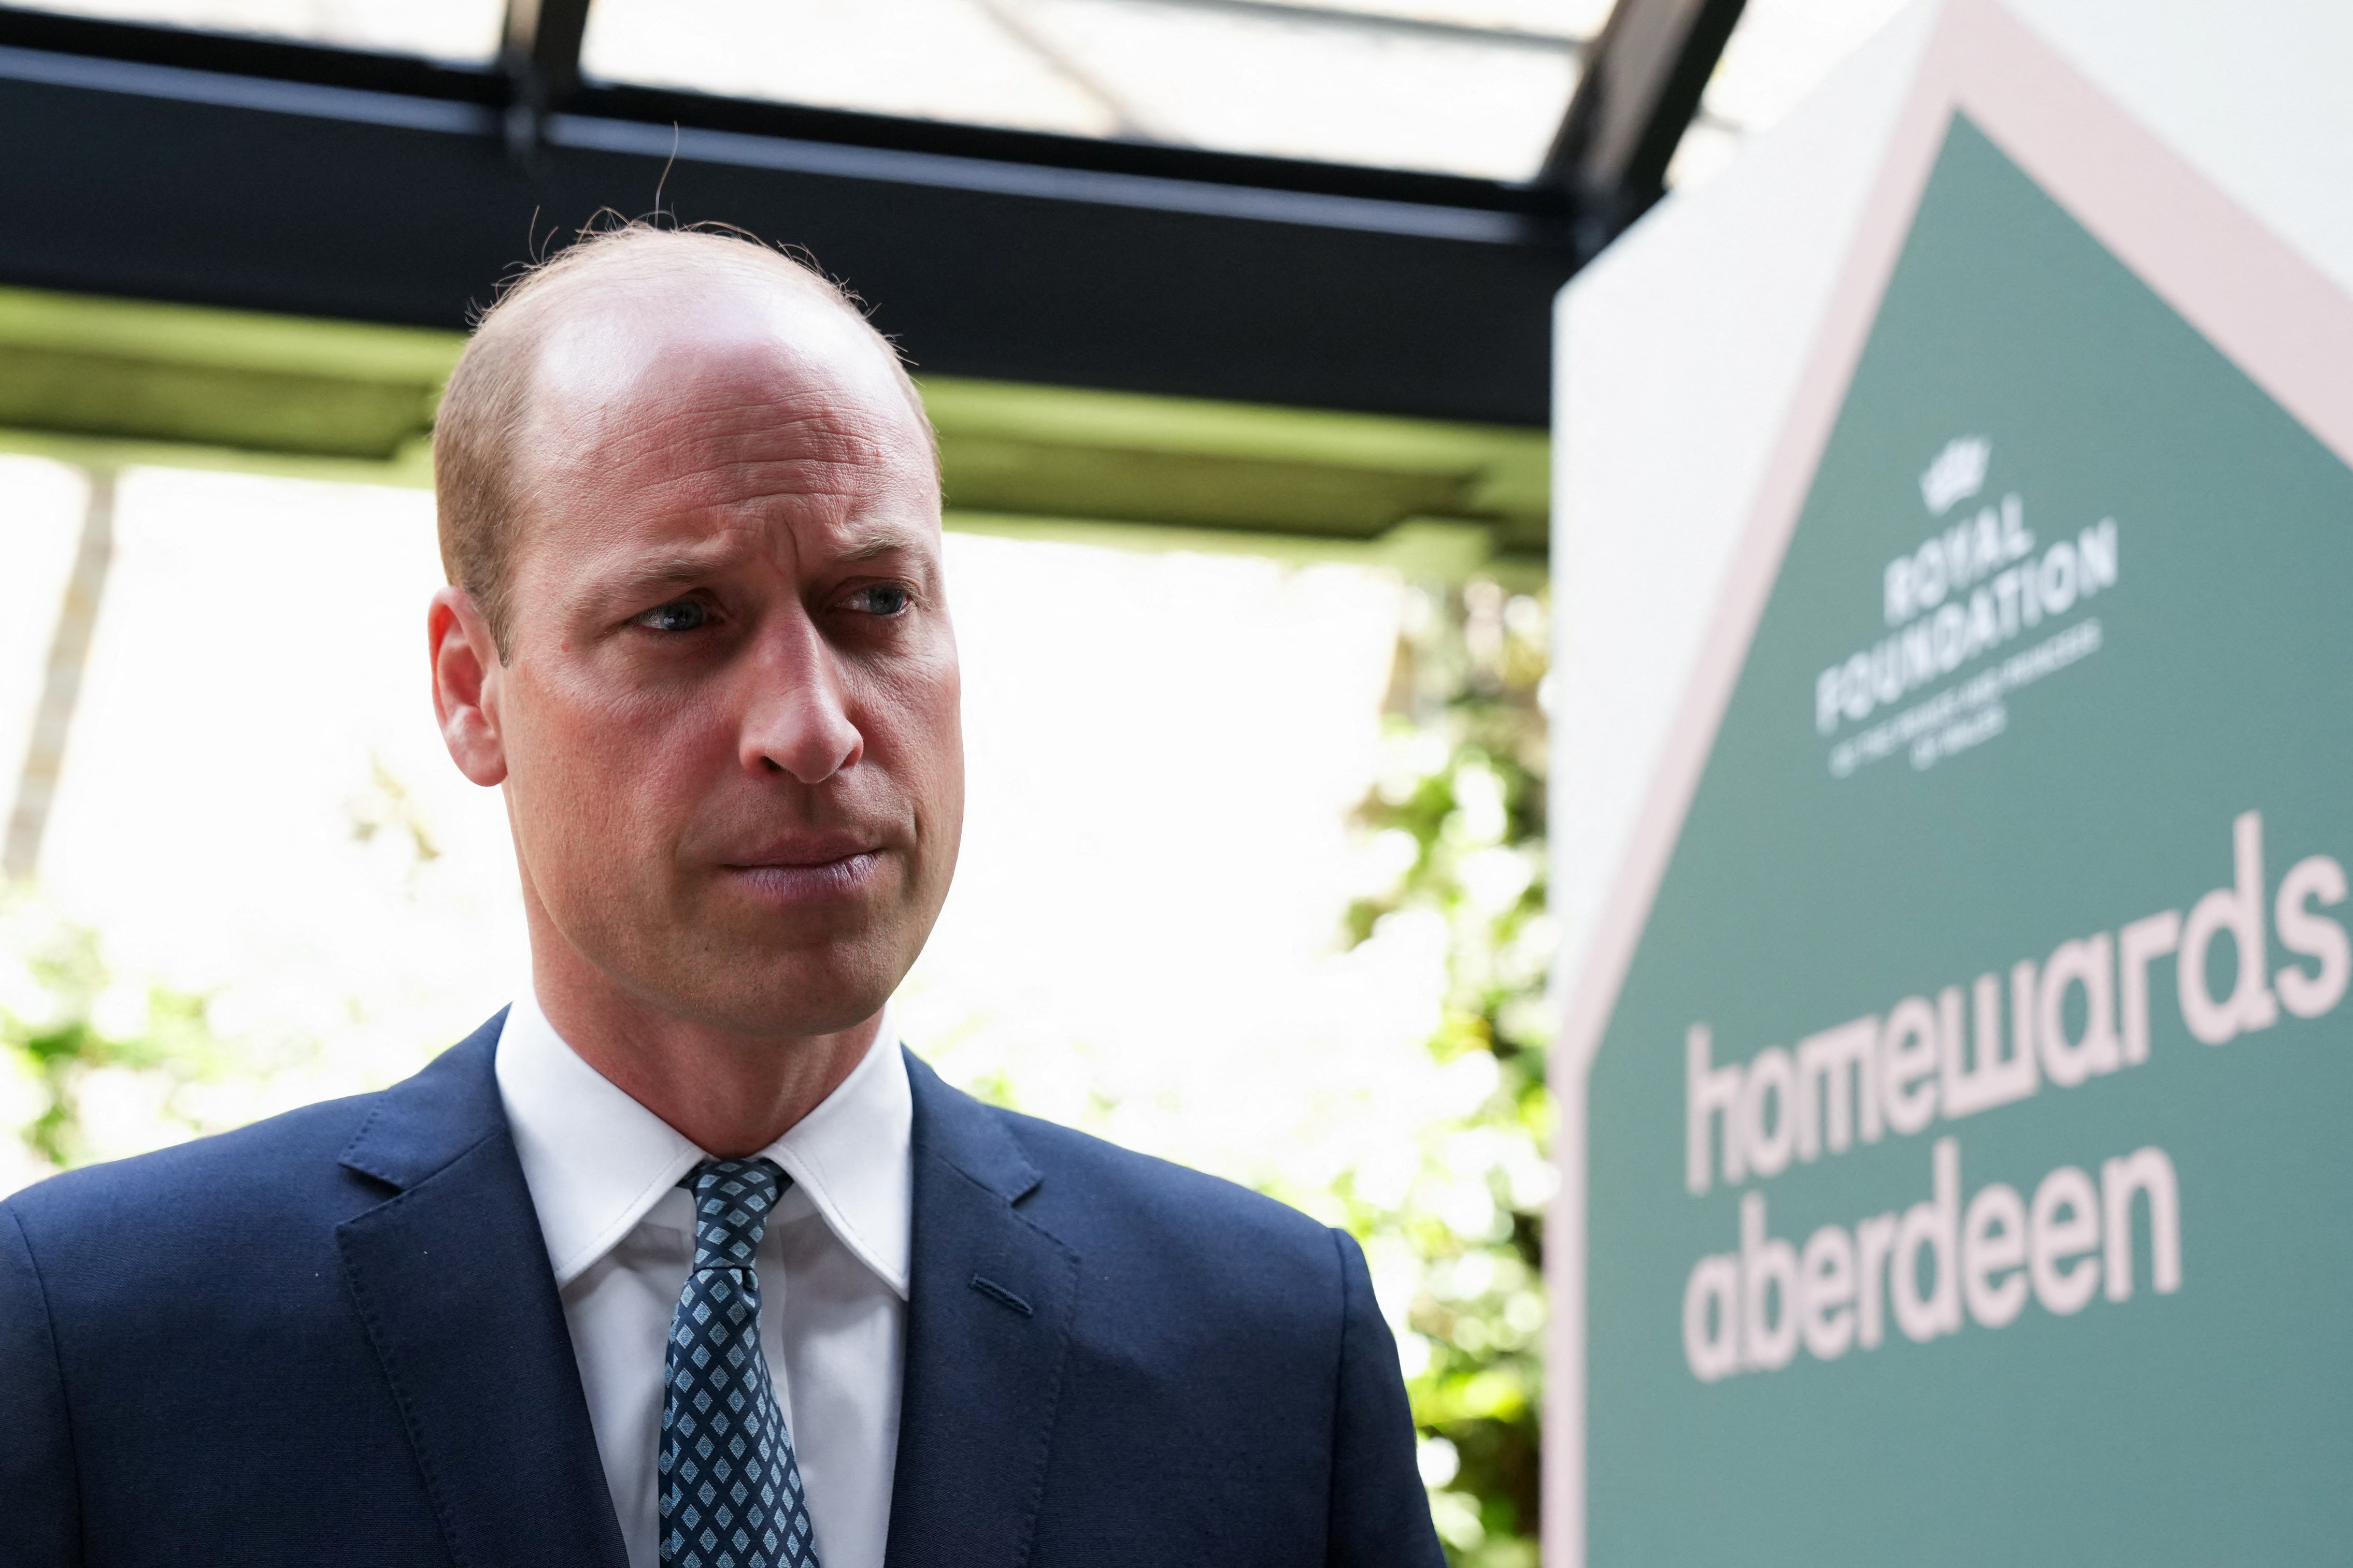 Homewards is a five-year project launched by William in 2023 to tackle homelessness